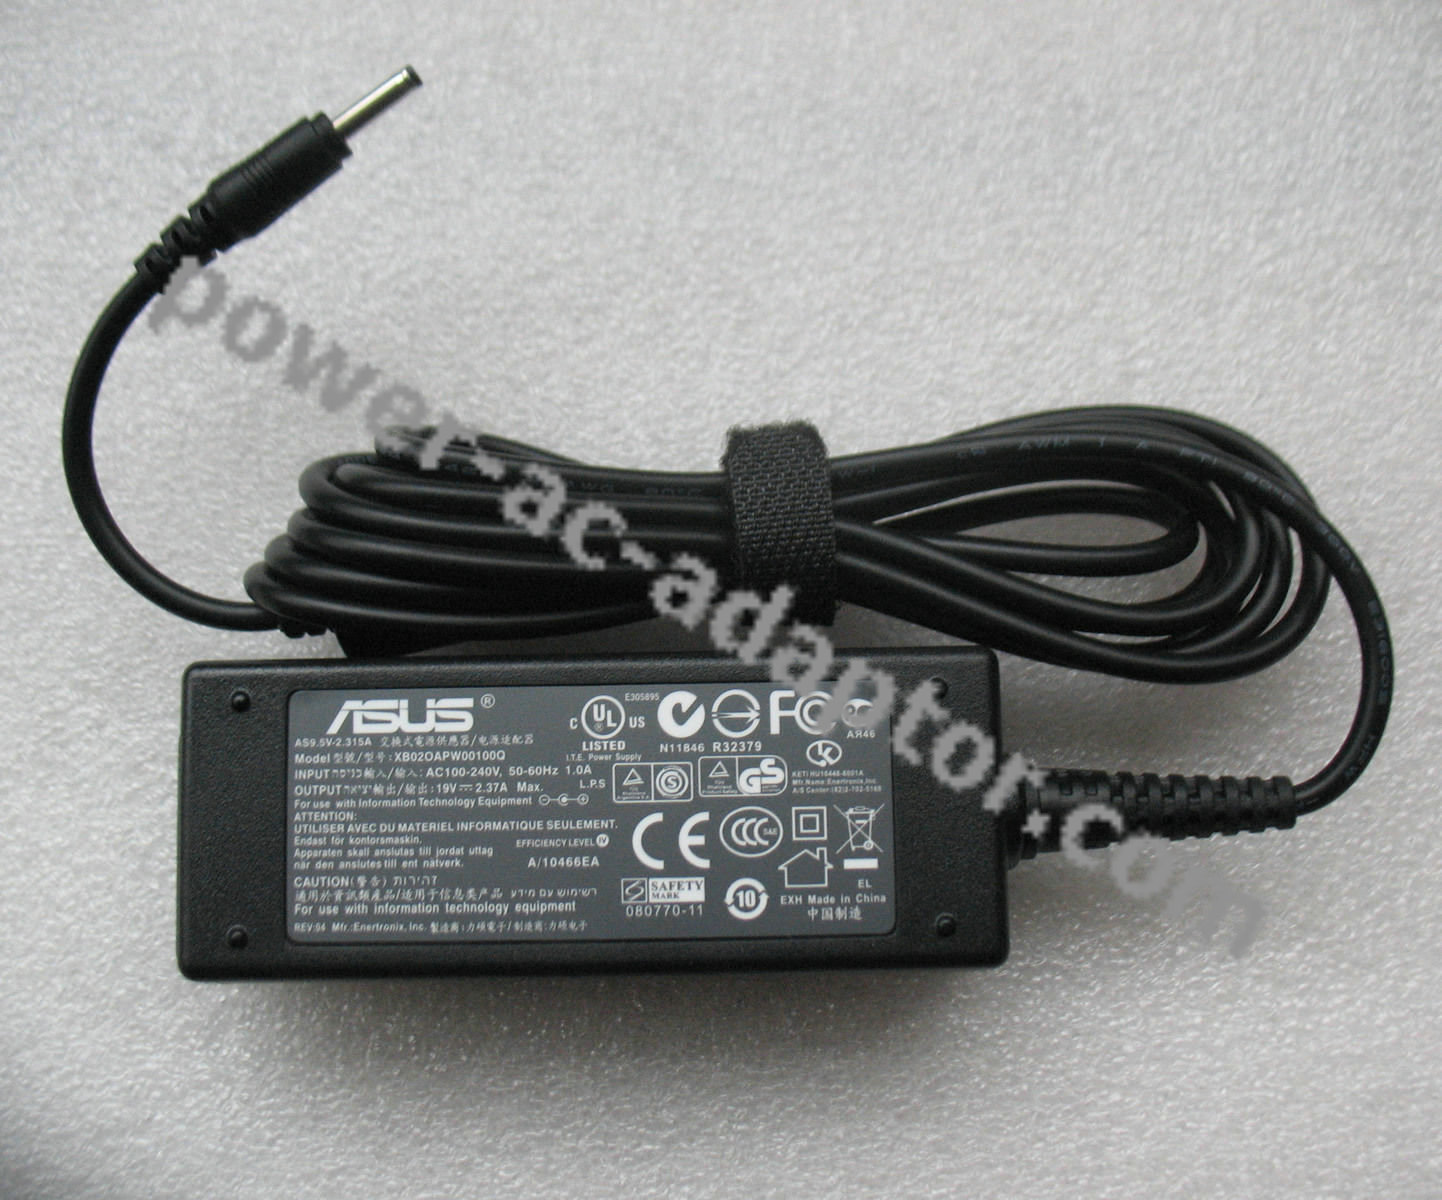 ASUS ZenBook UX21E-DH71/UX21E-XH71 AC Adapter Charger